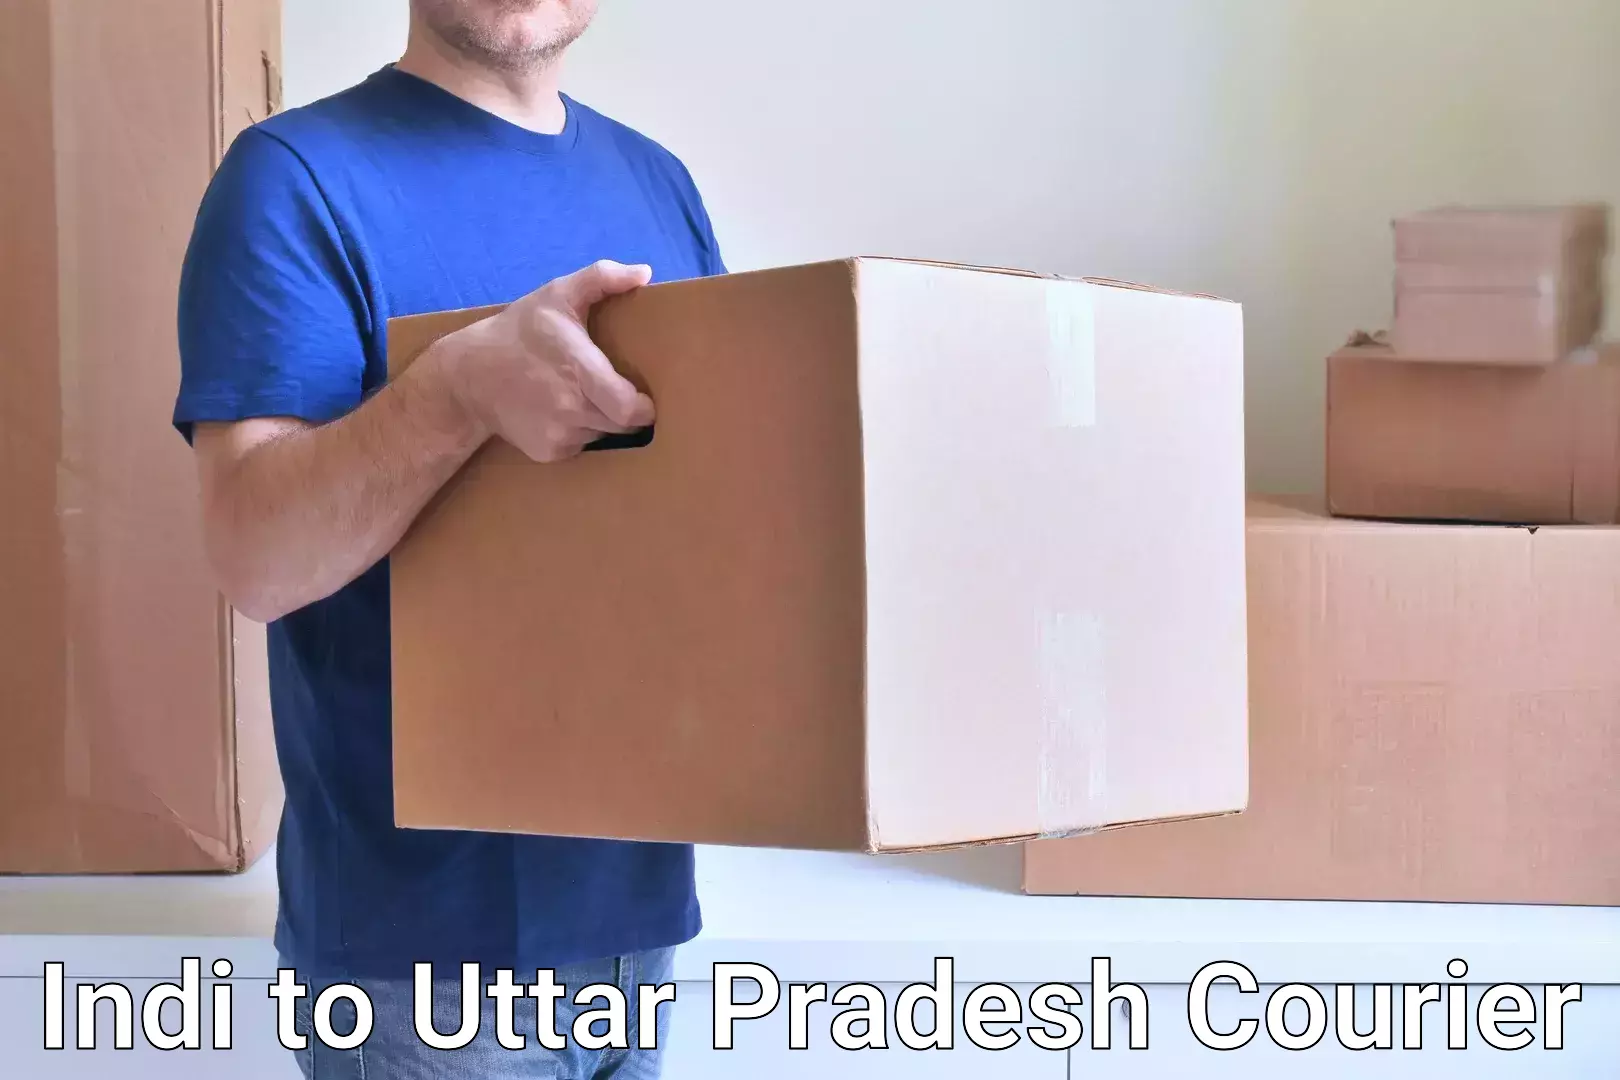 State-of-the-art courier technology Indi to Allahabad